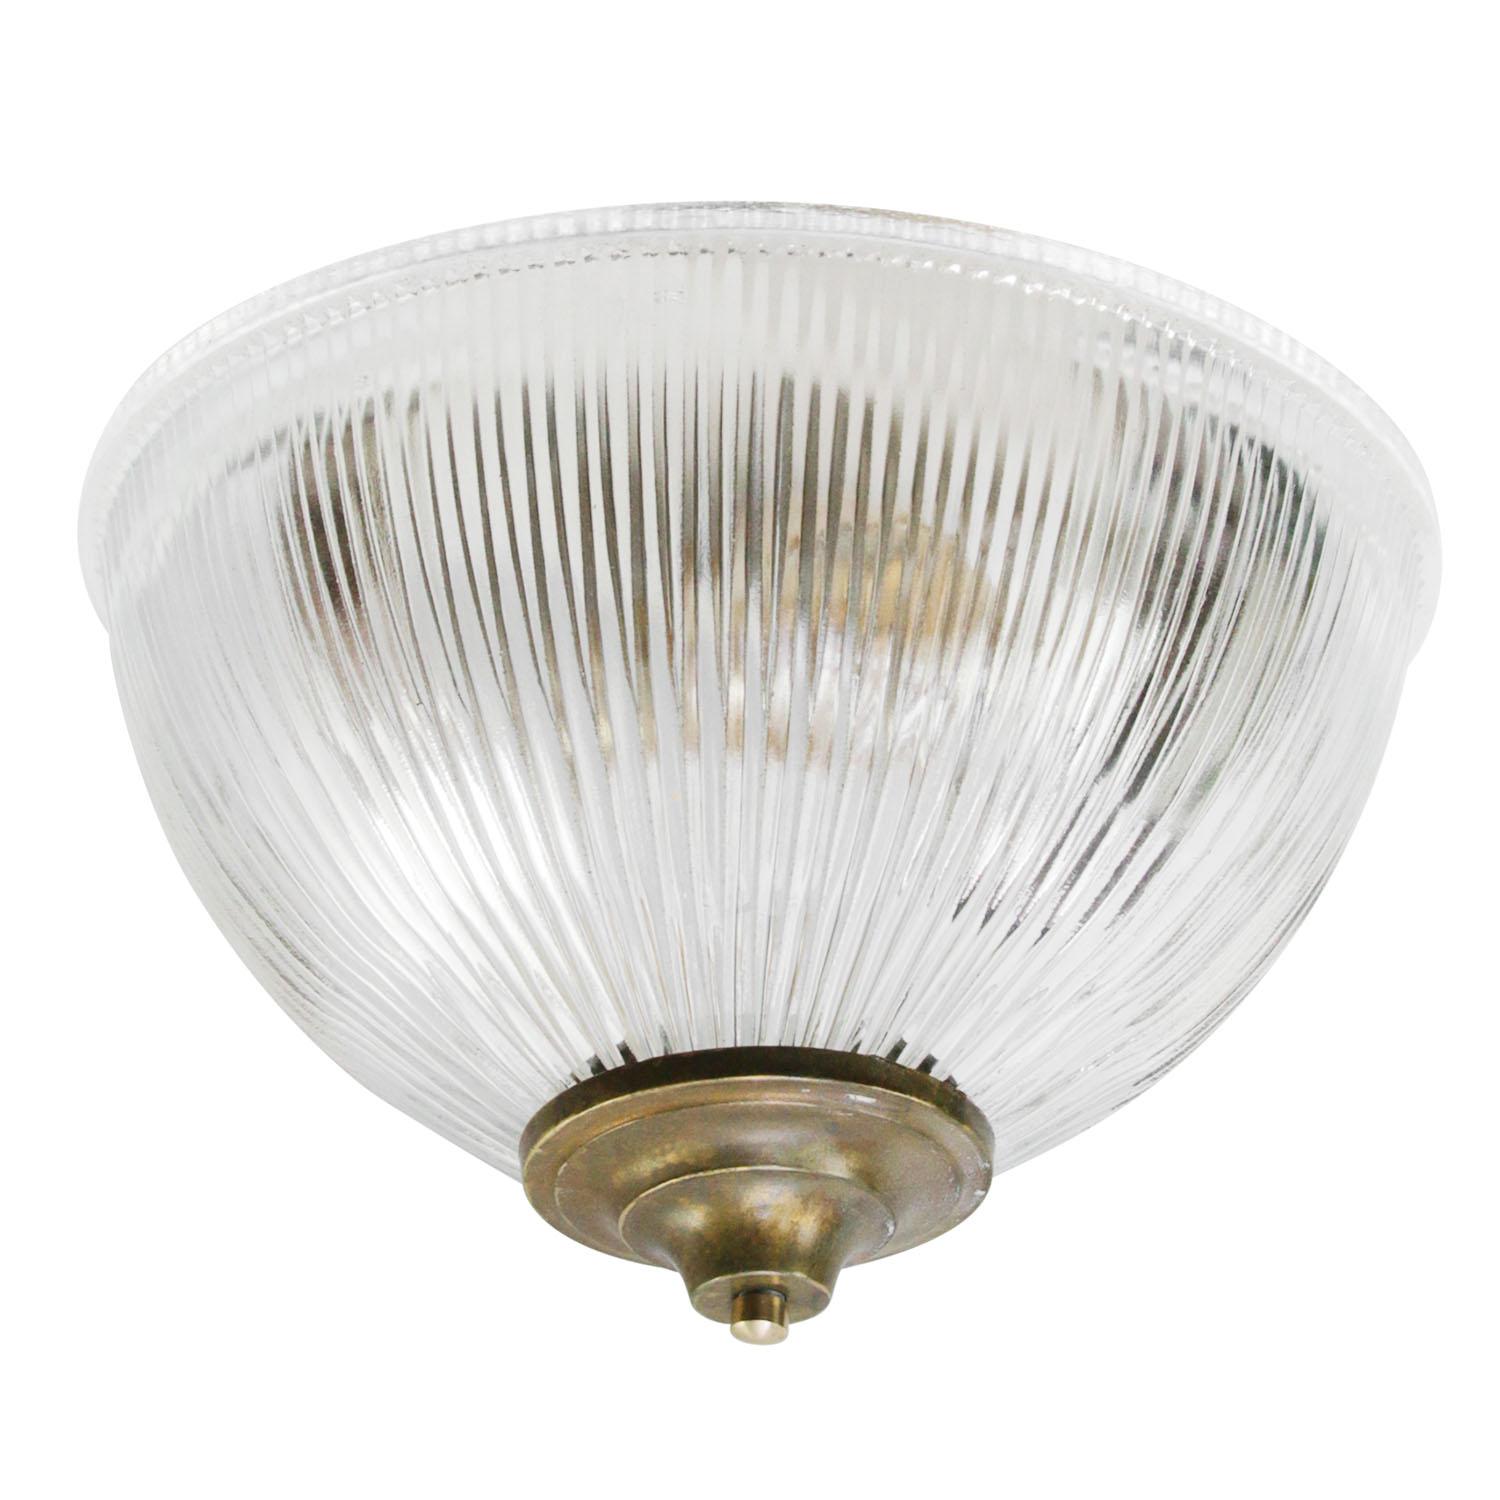 Holophane glass ceiling lamp / flush mount
2x E27/E26 bulb holder with striped glass shade

Metal ceiling plate 17 × 13 cm

Weight: 2.60 kg / 5.7 lb

Priced per individual item. All lamps have been made suitable by international standards for